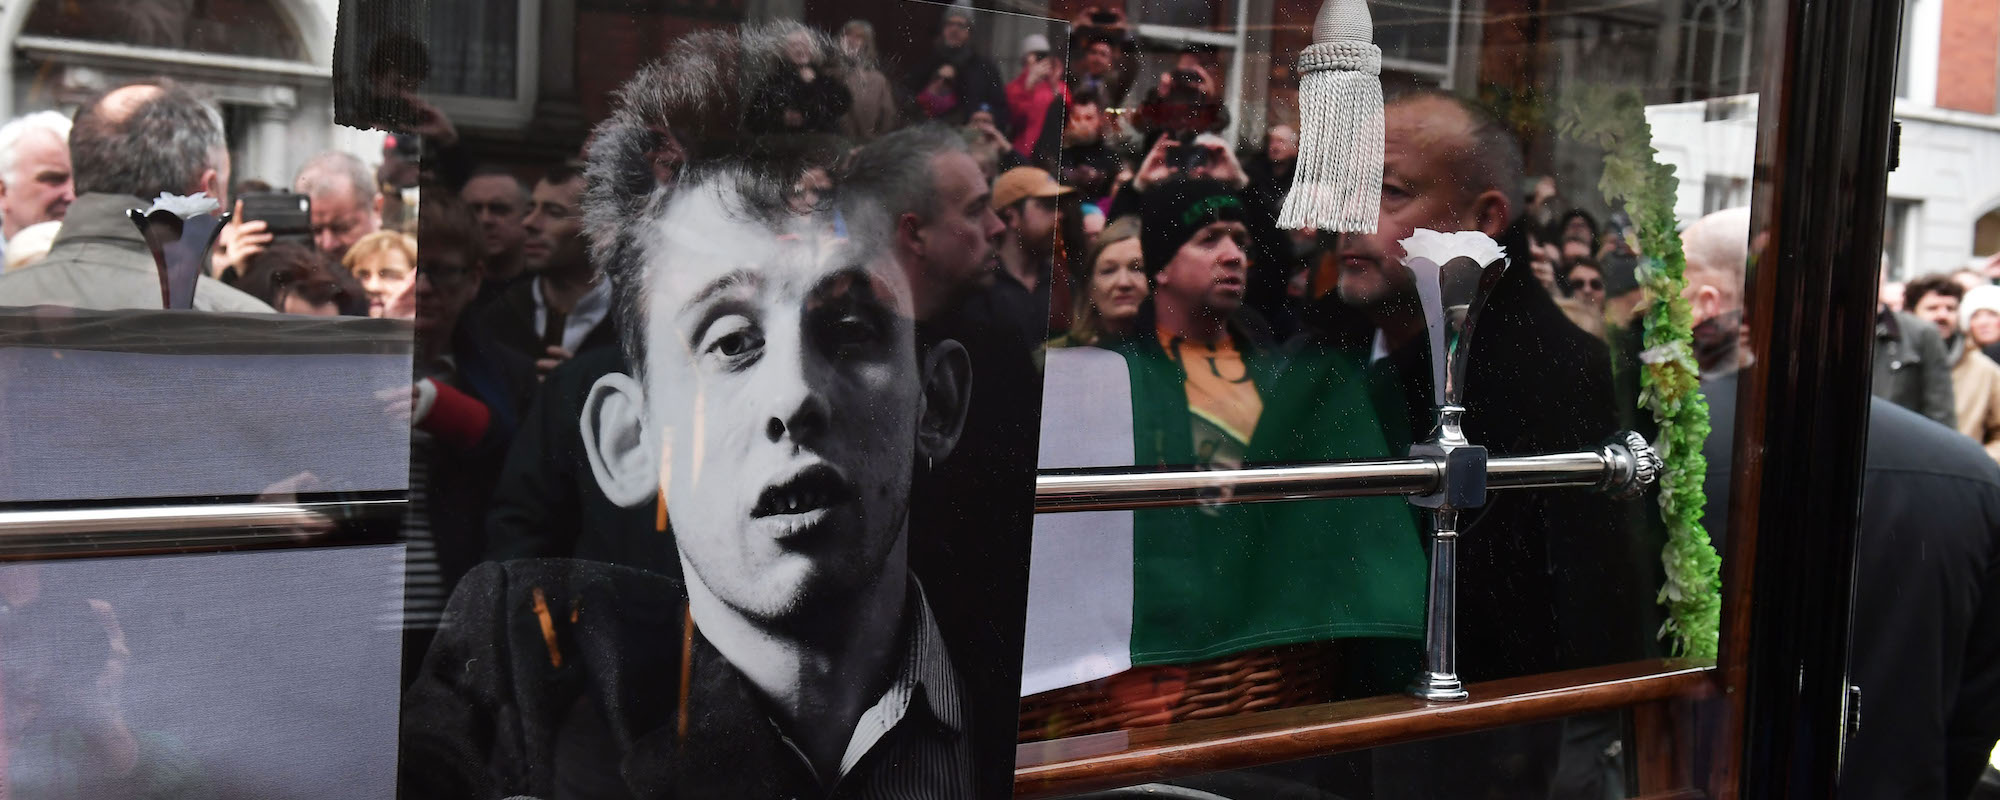 The Pogues Reunite for Moving Performance of the Band’s “The Parting Glass” During Shane MacGowan’s Funeral